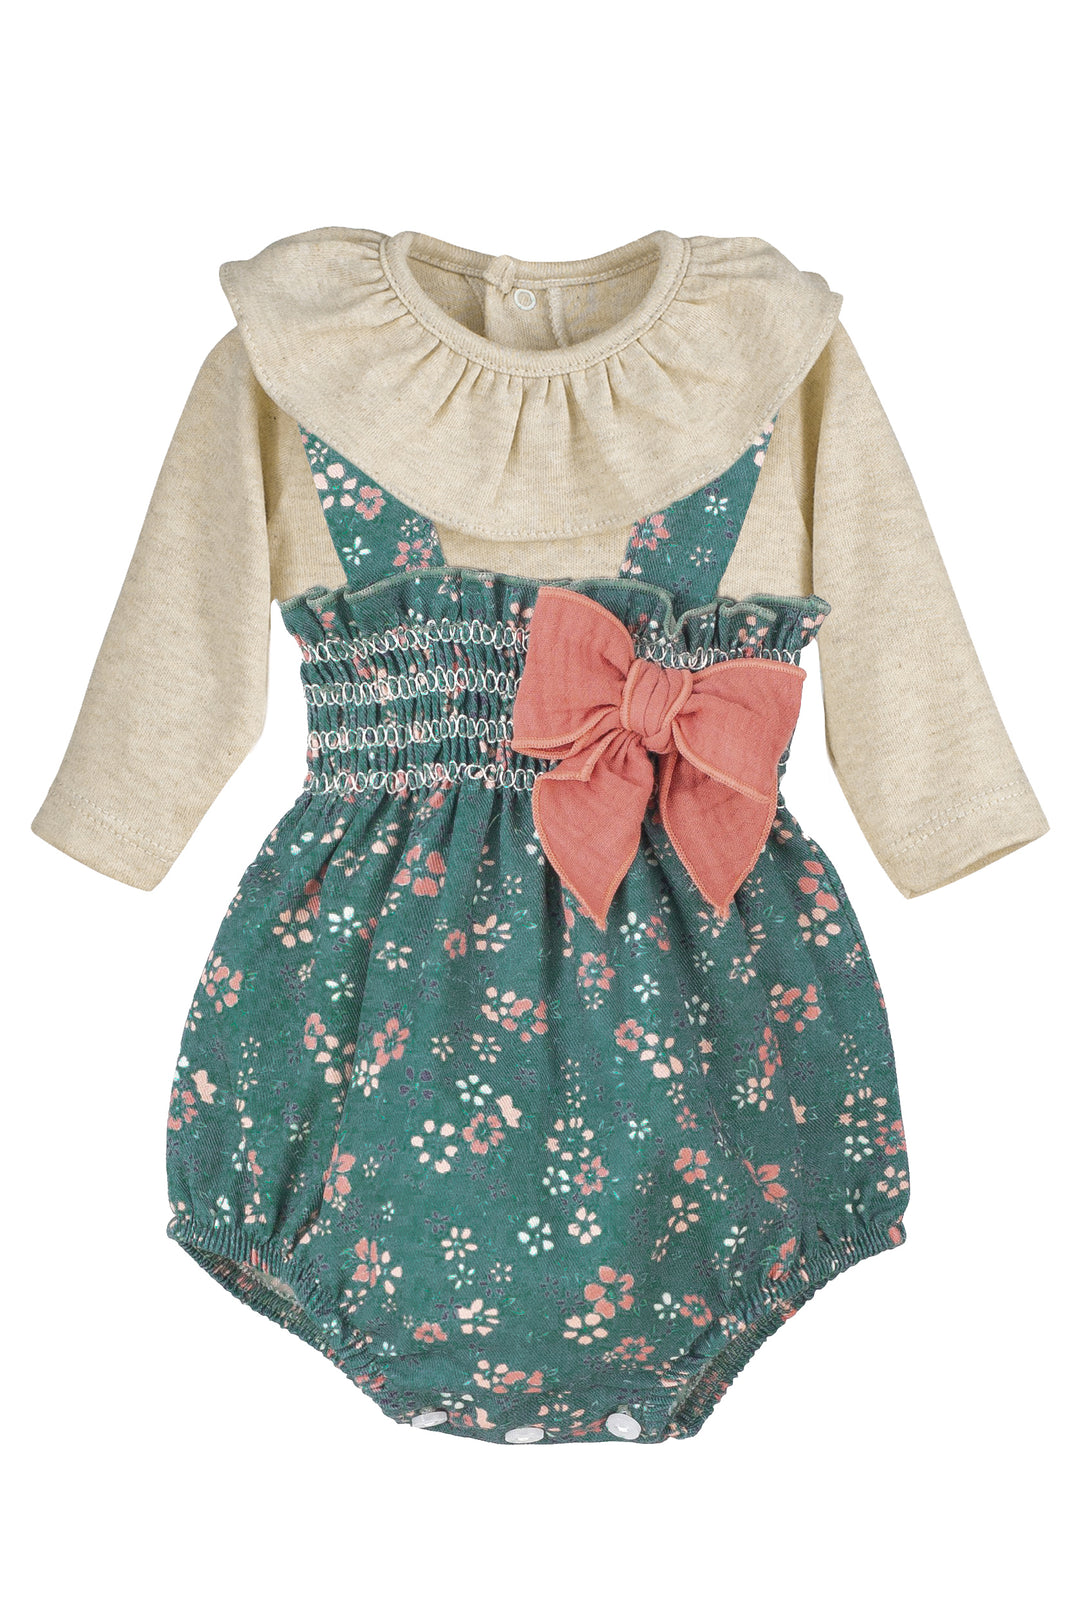 Calamaro "Nell" Sand Bodysuit & Teal Floral Shortie | Millie and John